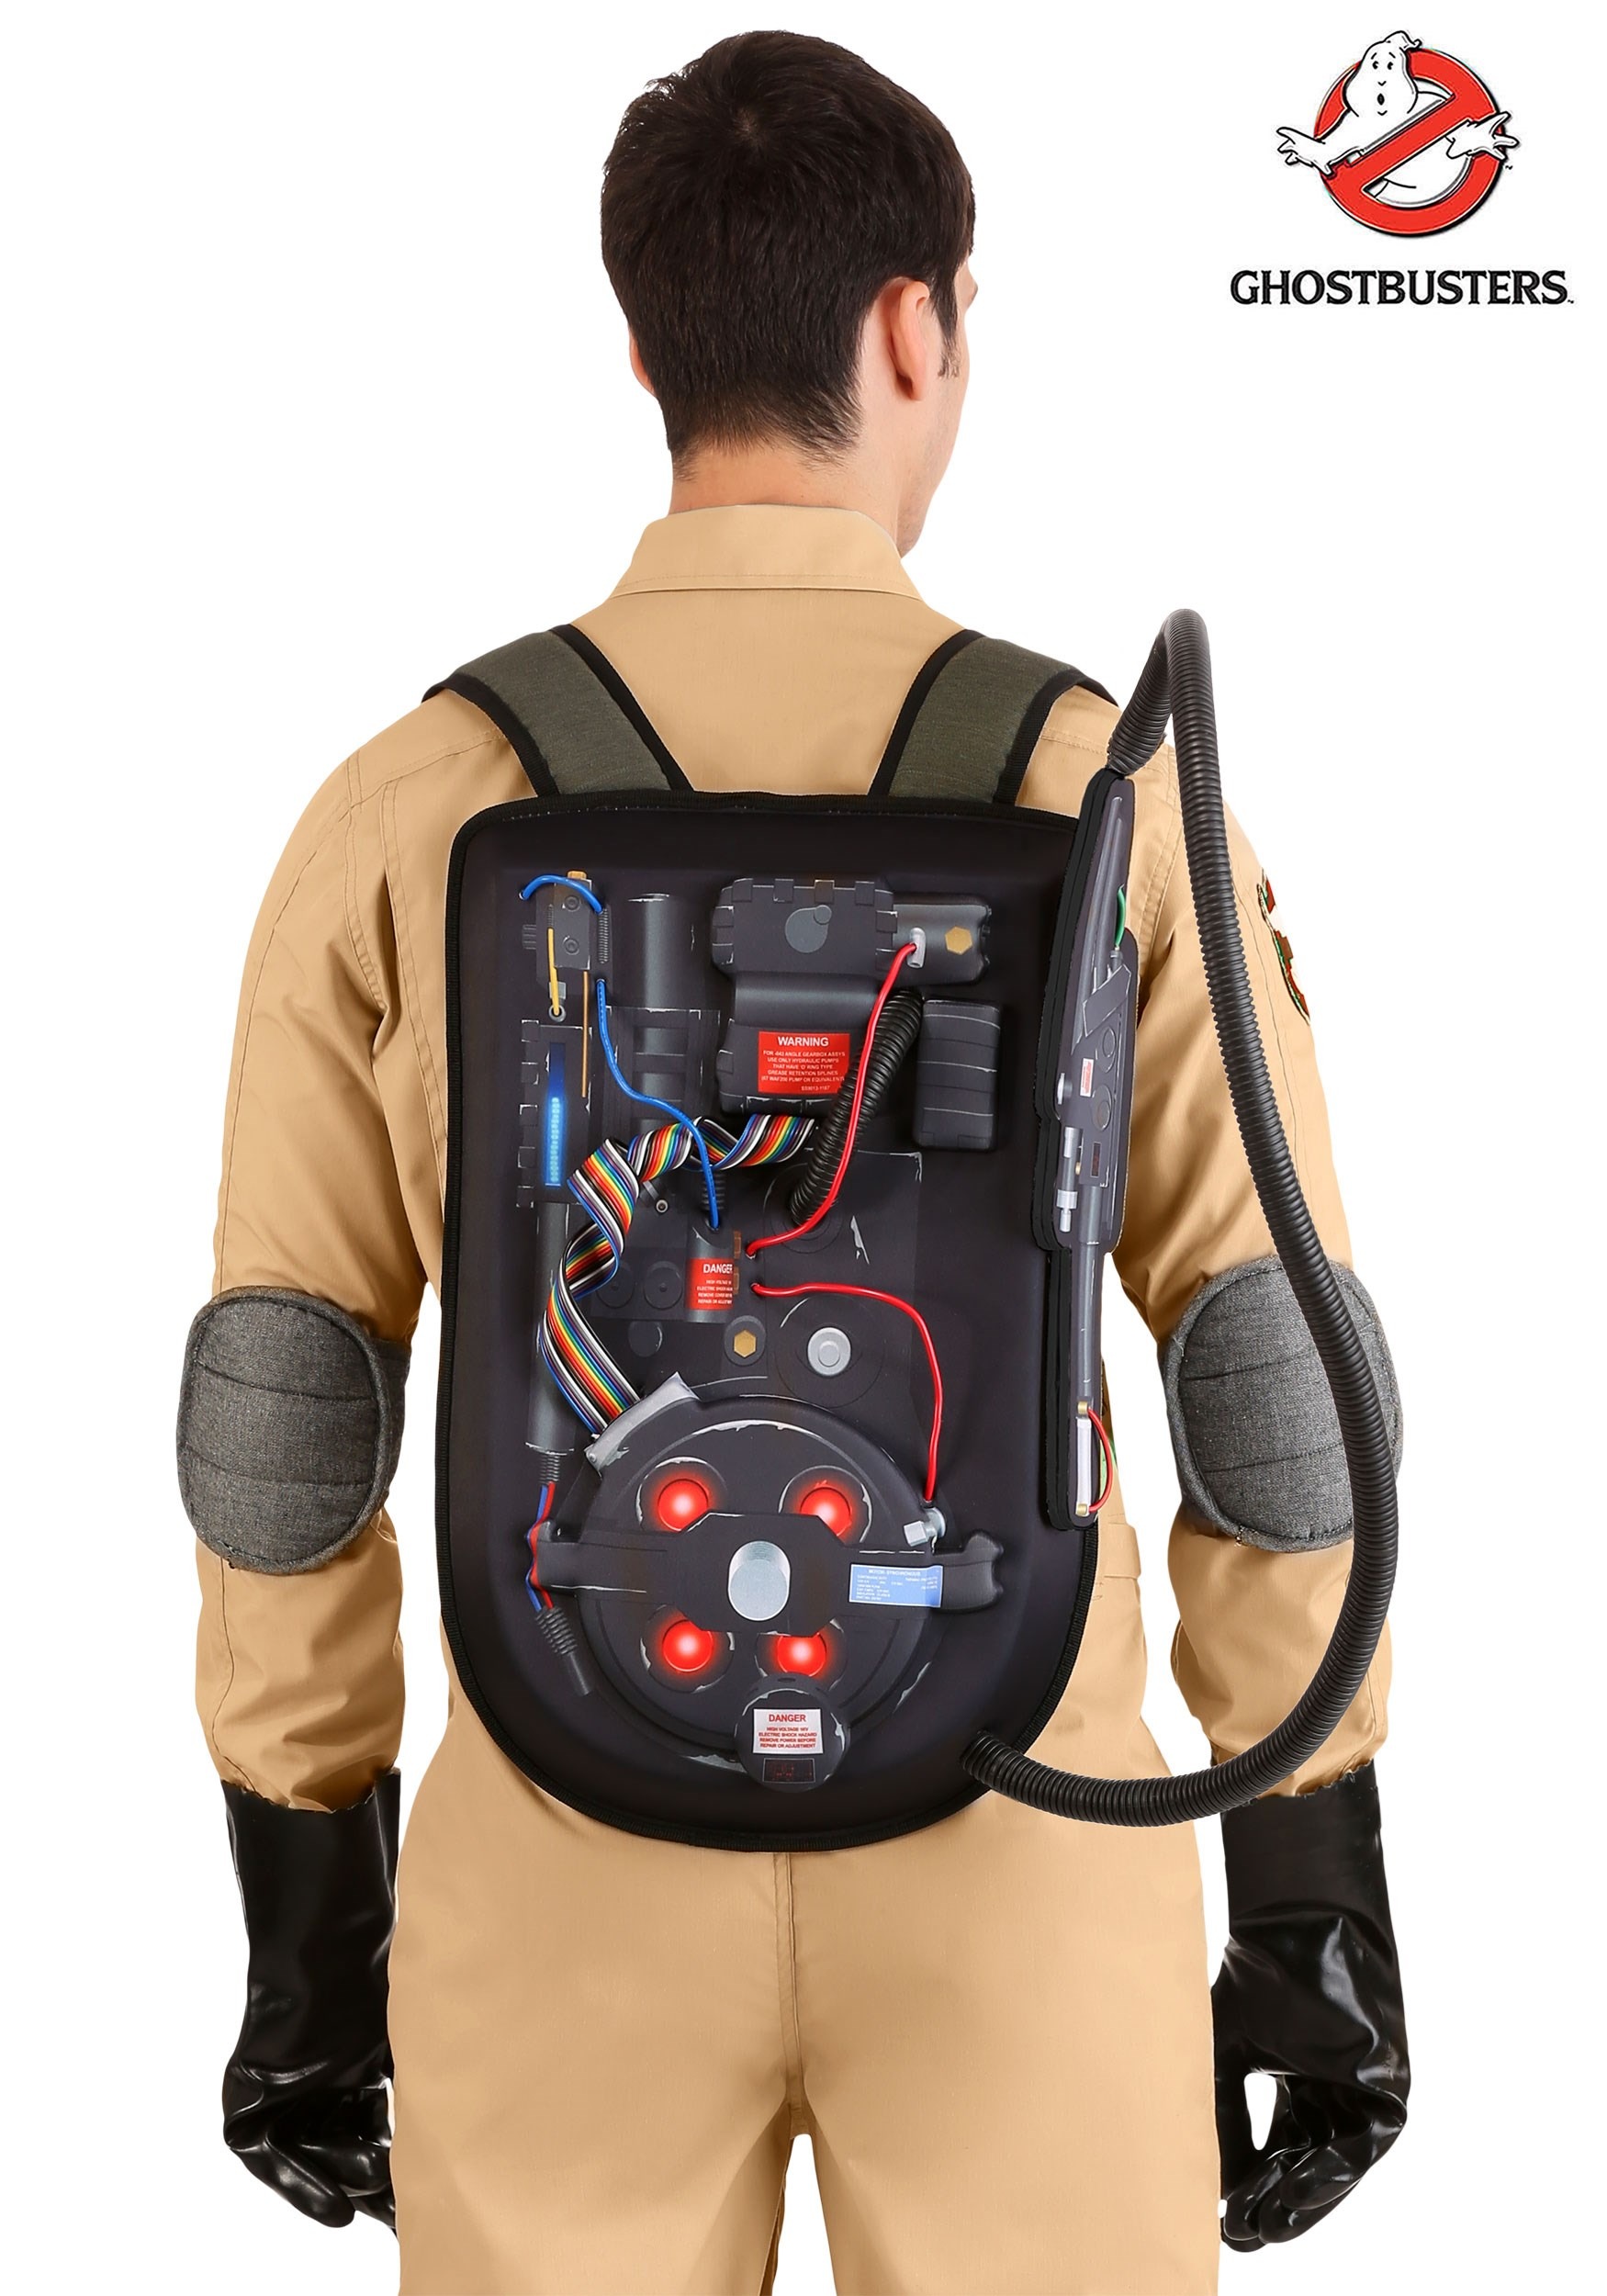 Ghostbusters Cosplay Proton Pack Mackpack con varita Multicolor Colombia